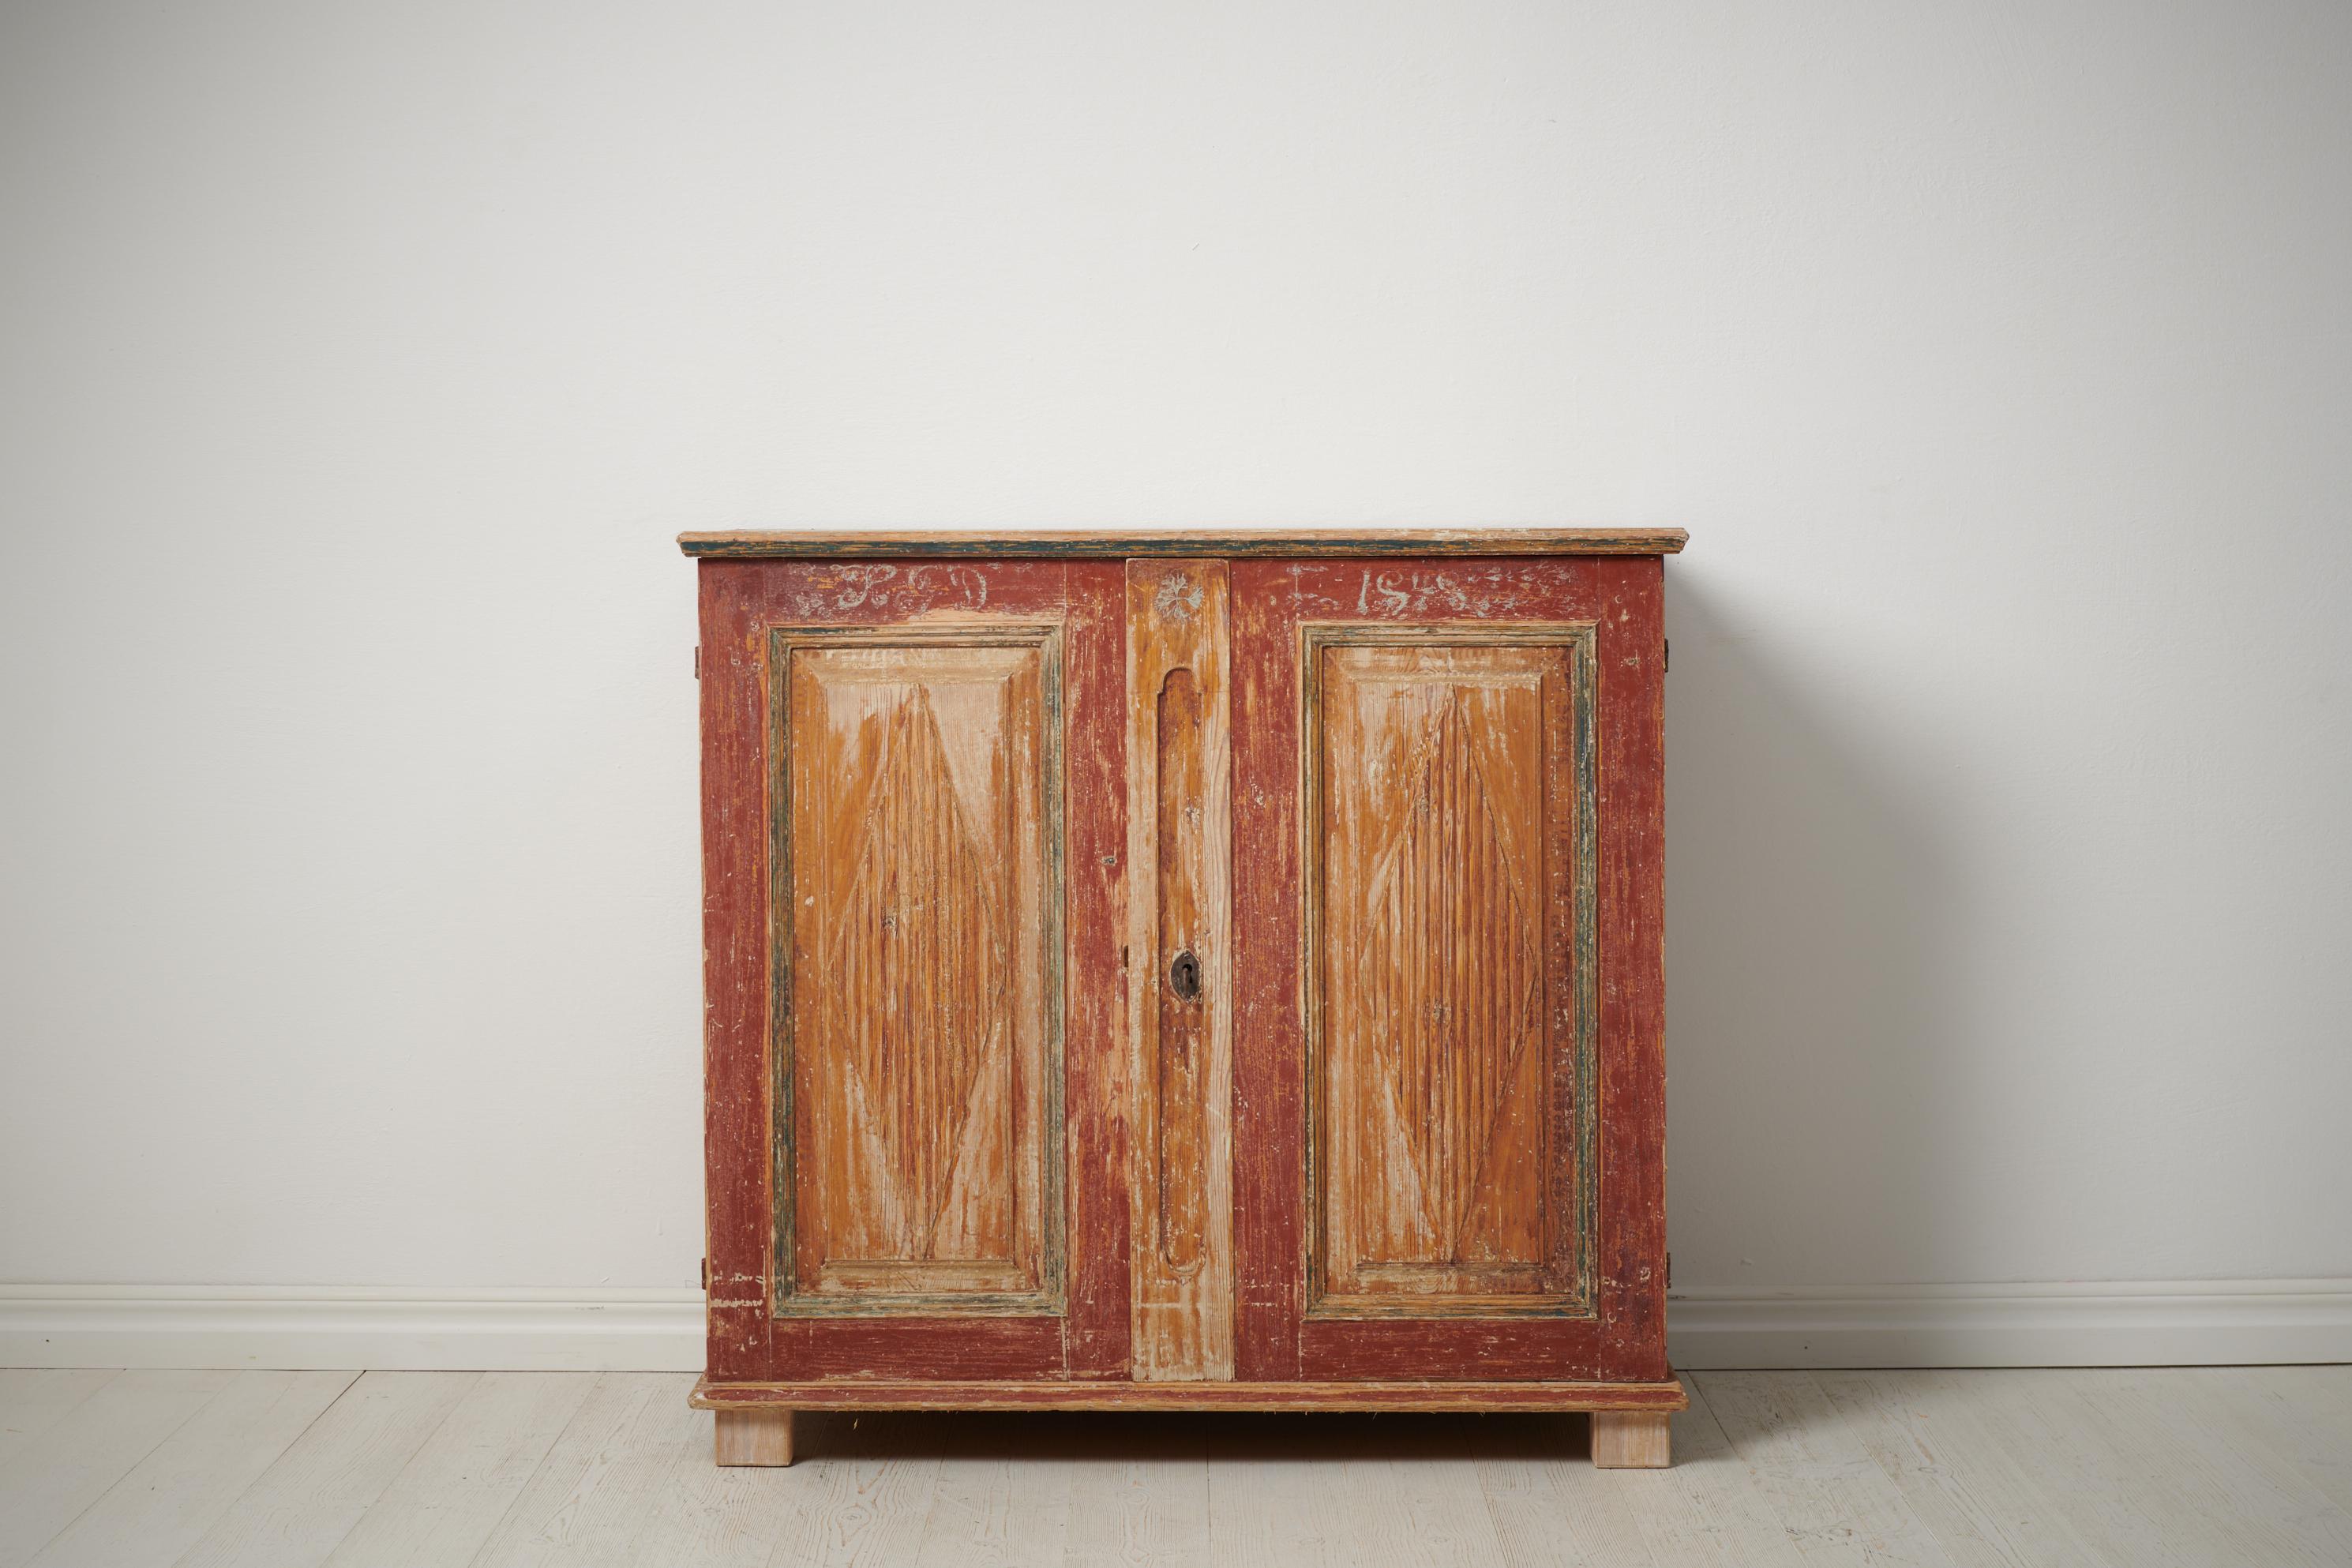 Genuine gustavian Swedish sideboard made by hand in northern Sweden from solid pine. The sideboard has a slightly unusual model as it has fluted panels also on the short sides. This piece is on the smaller side and has elegant proportions, please